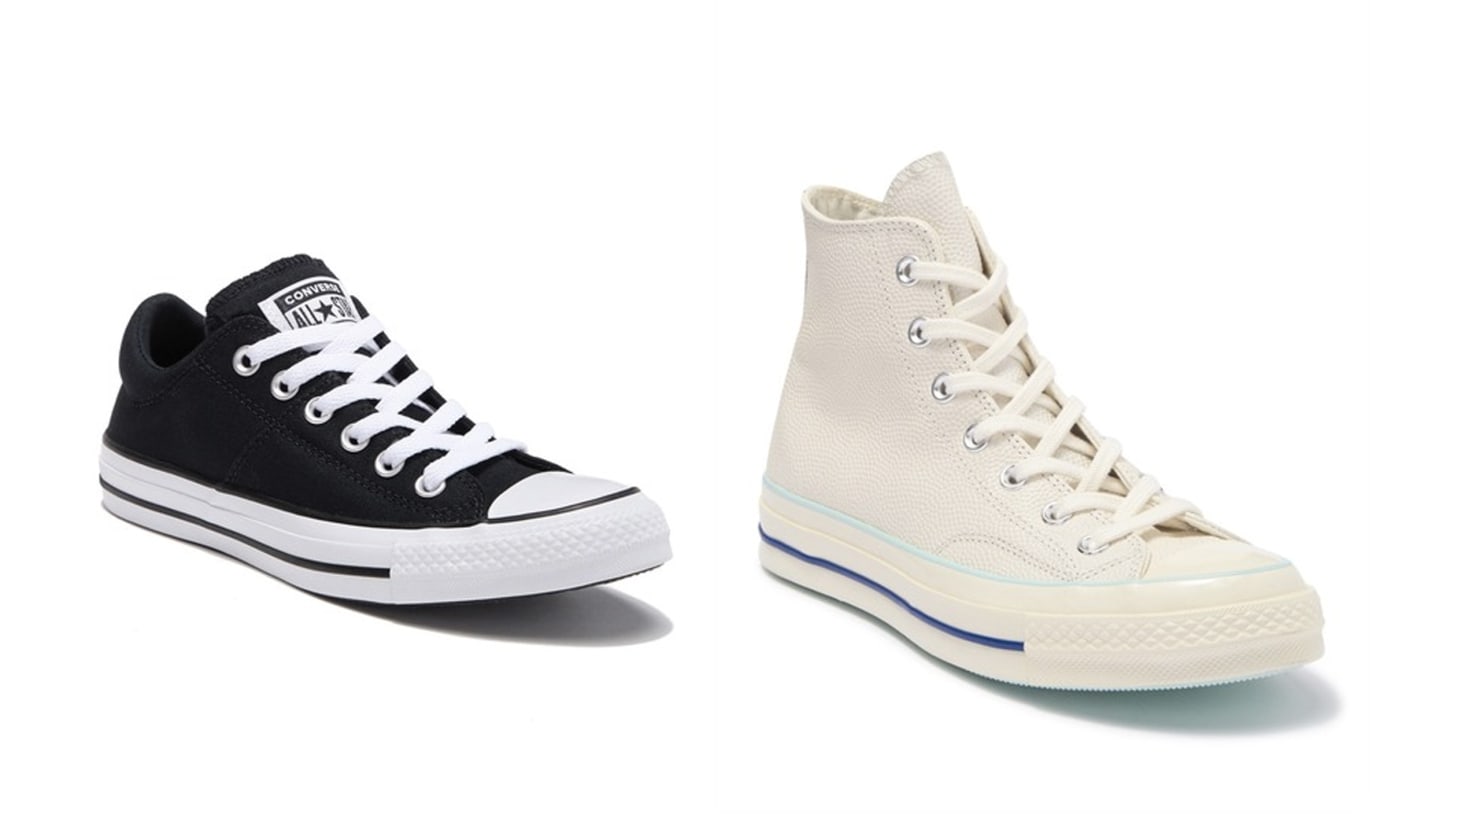 Classic Converse Styles are Up to 55% Off at Nordstrom Rack